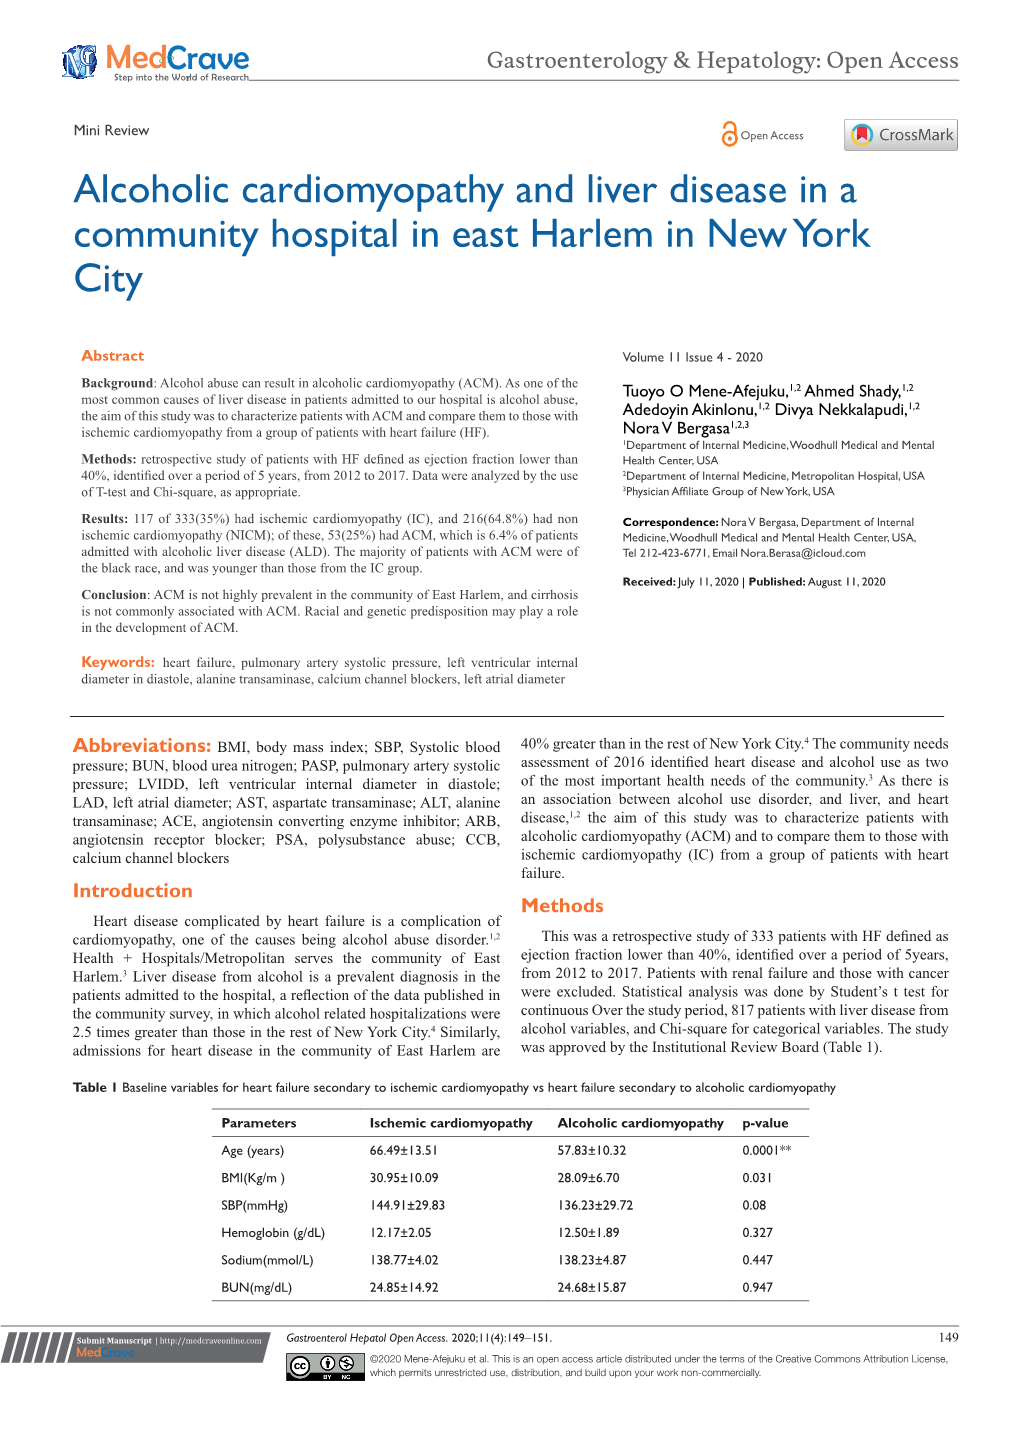 Alcoholic Cardiomyopathy and Liver Disease in a Community Hospital in East Harlem in New York City